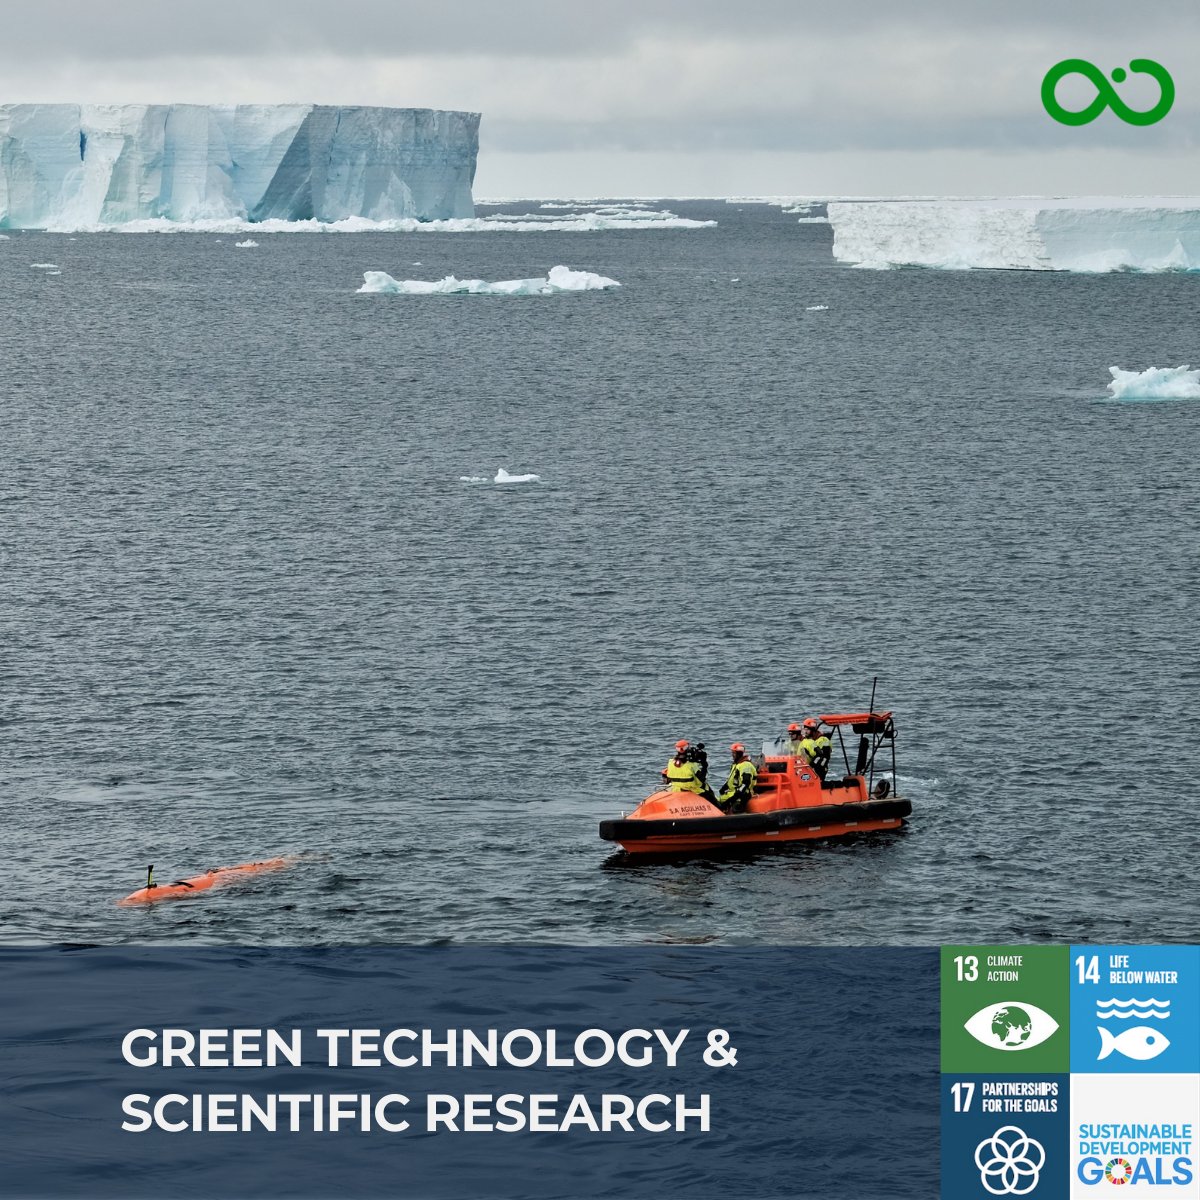 Cross partnership is a fundamental part of successfully taking action against #climatechange. In 2019 we partnered with the Weddell Sea expedition to deploy marine robots to investigate the impact that climate change was having on the environment in Antarctica.